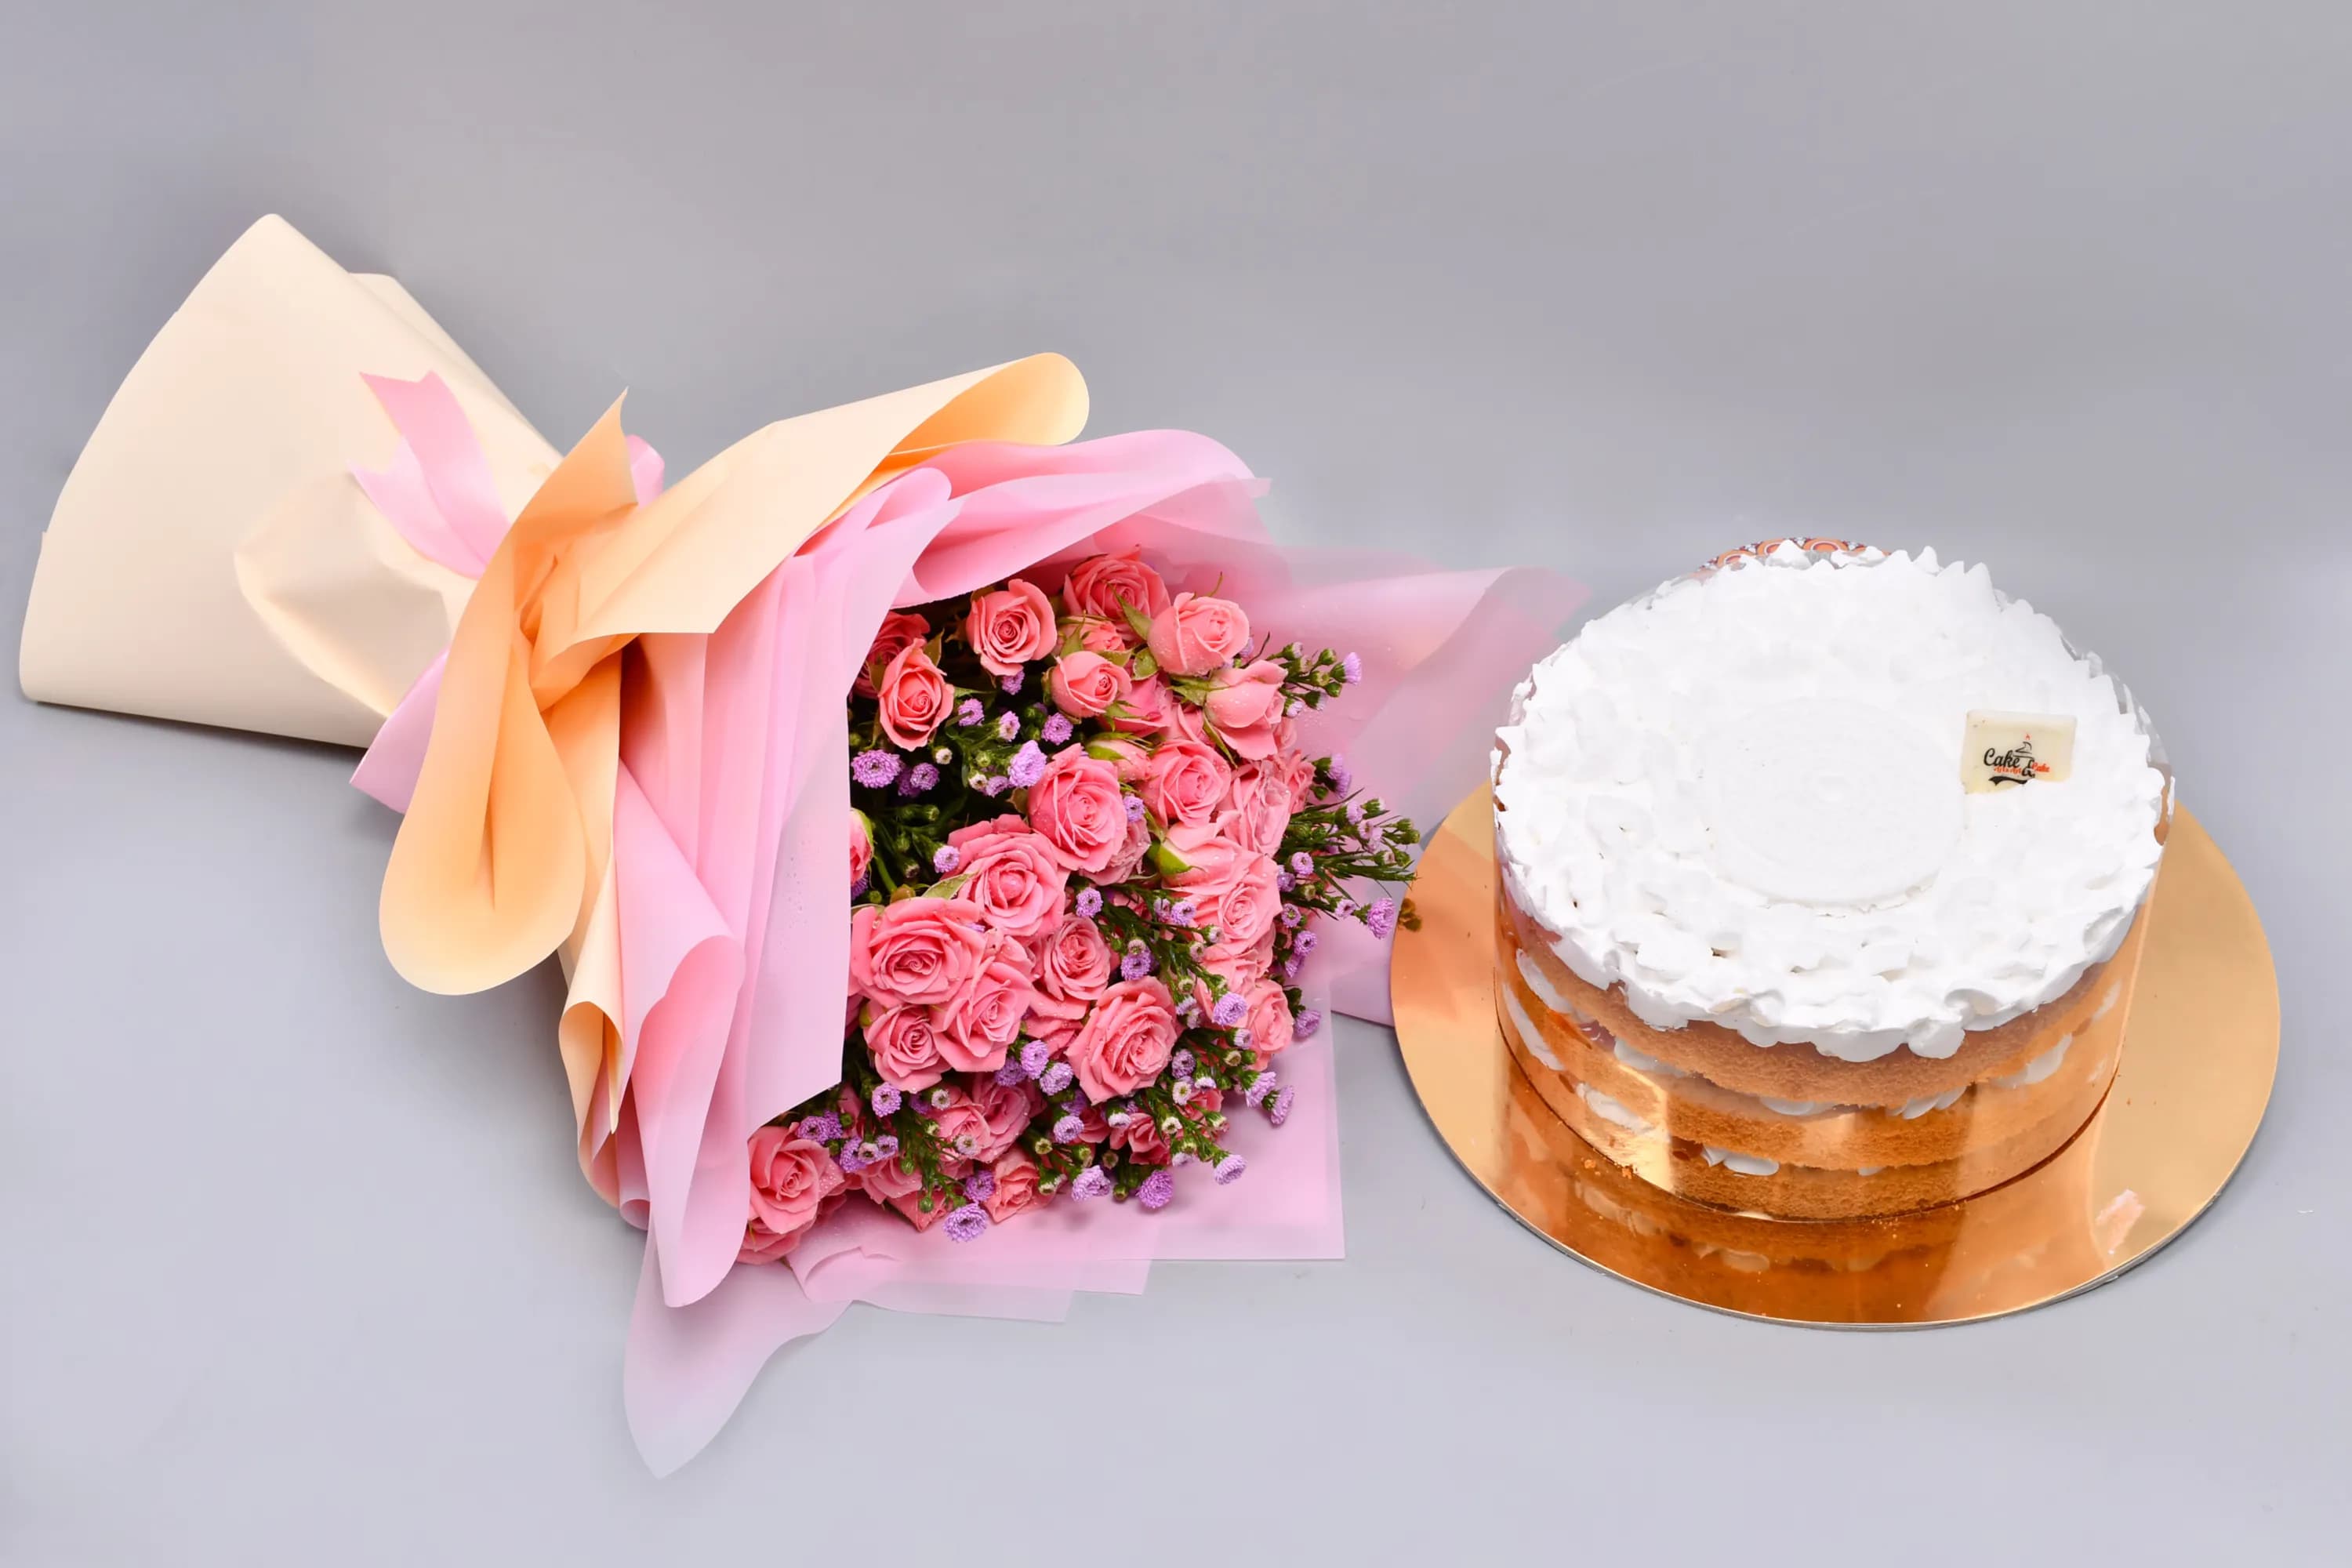 Cake and Cake Flowers